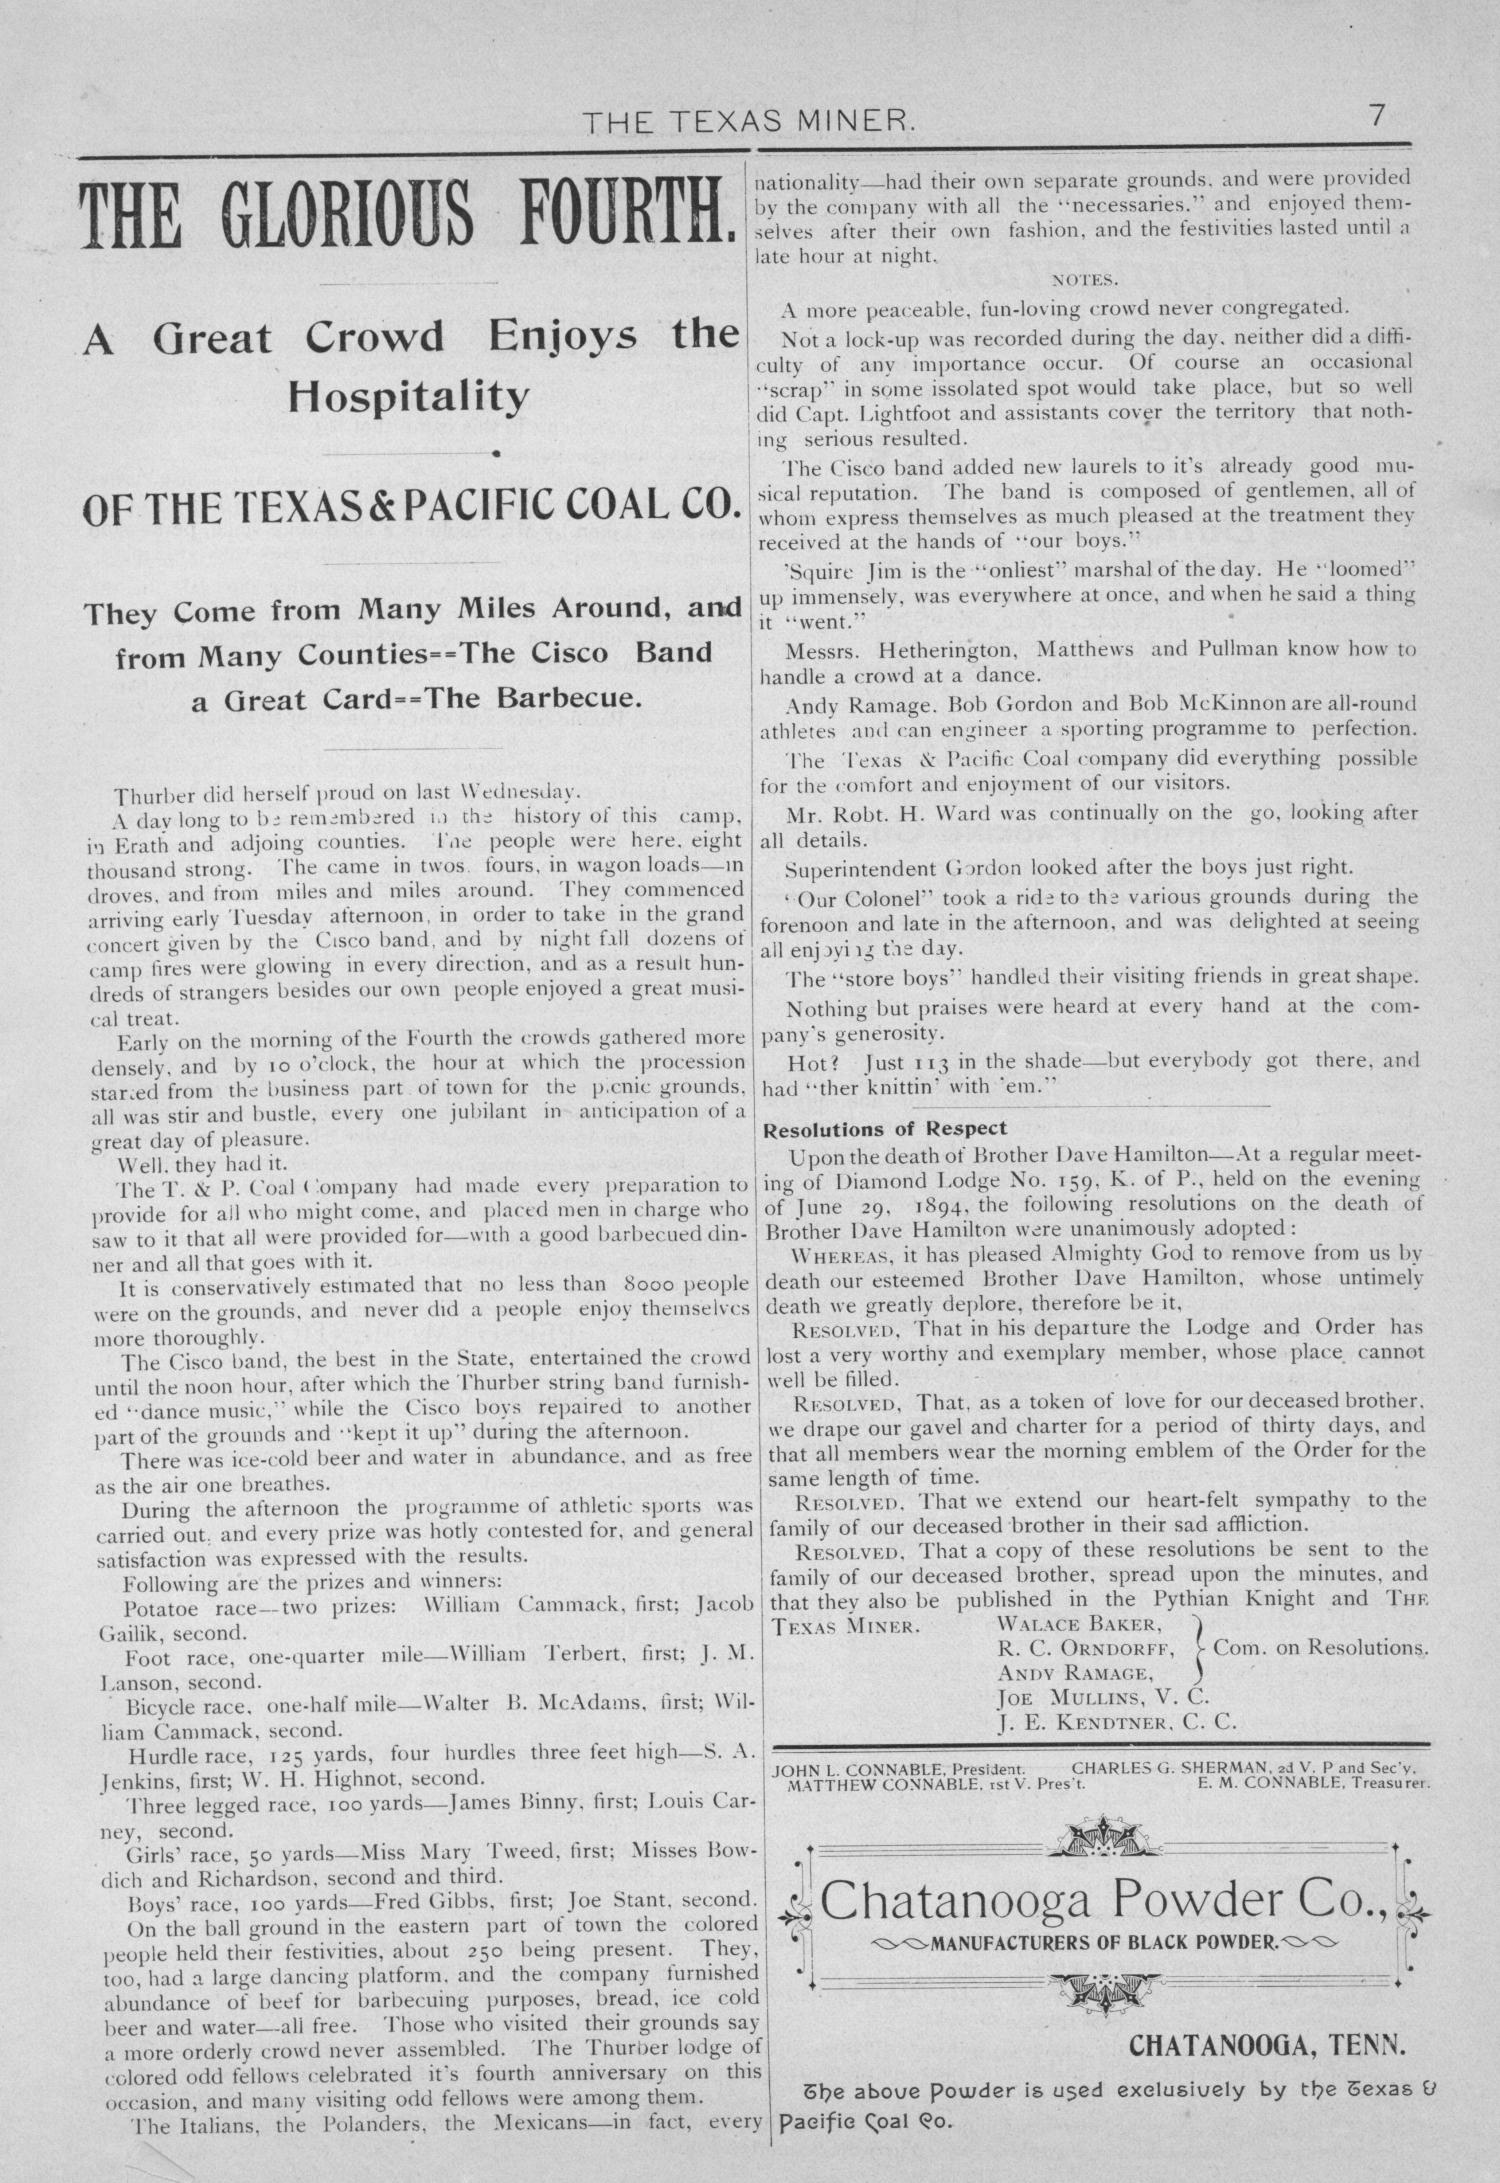 The Texas Miner, Volume 1, Number 25, July 7, 1894
                                                
                                                    7
                                                